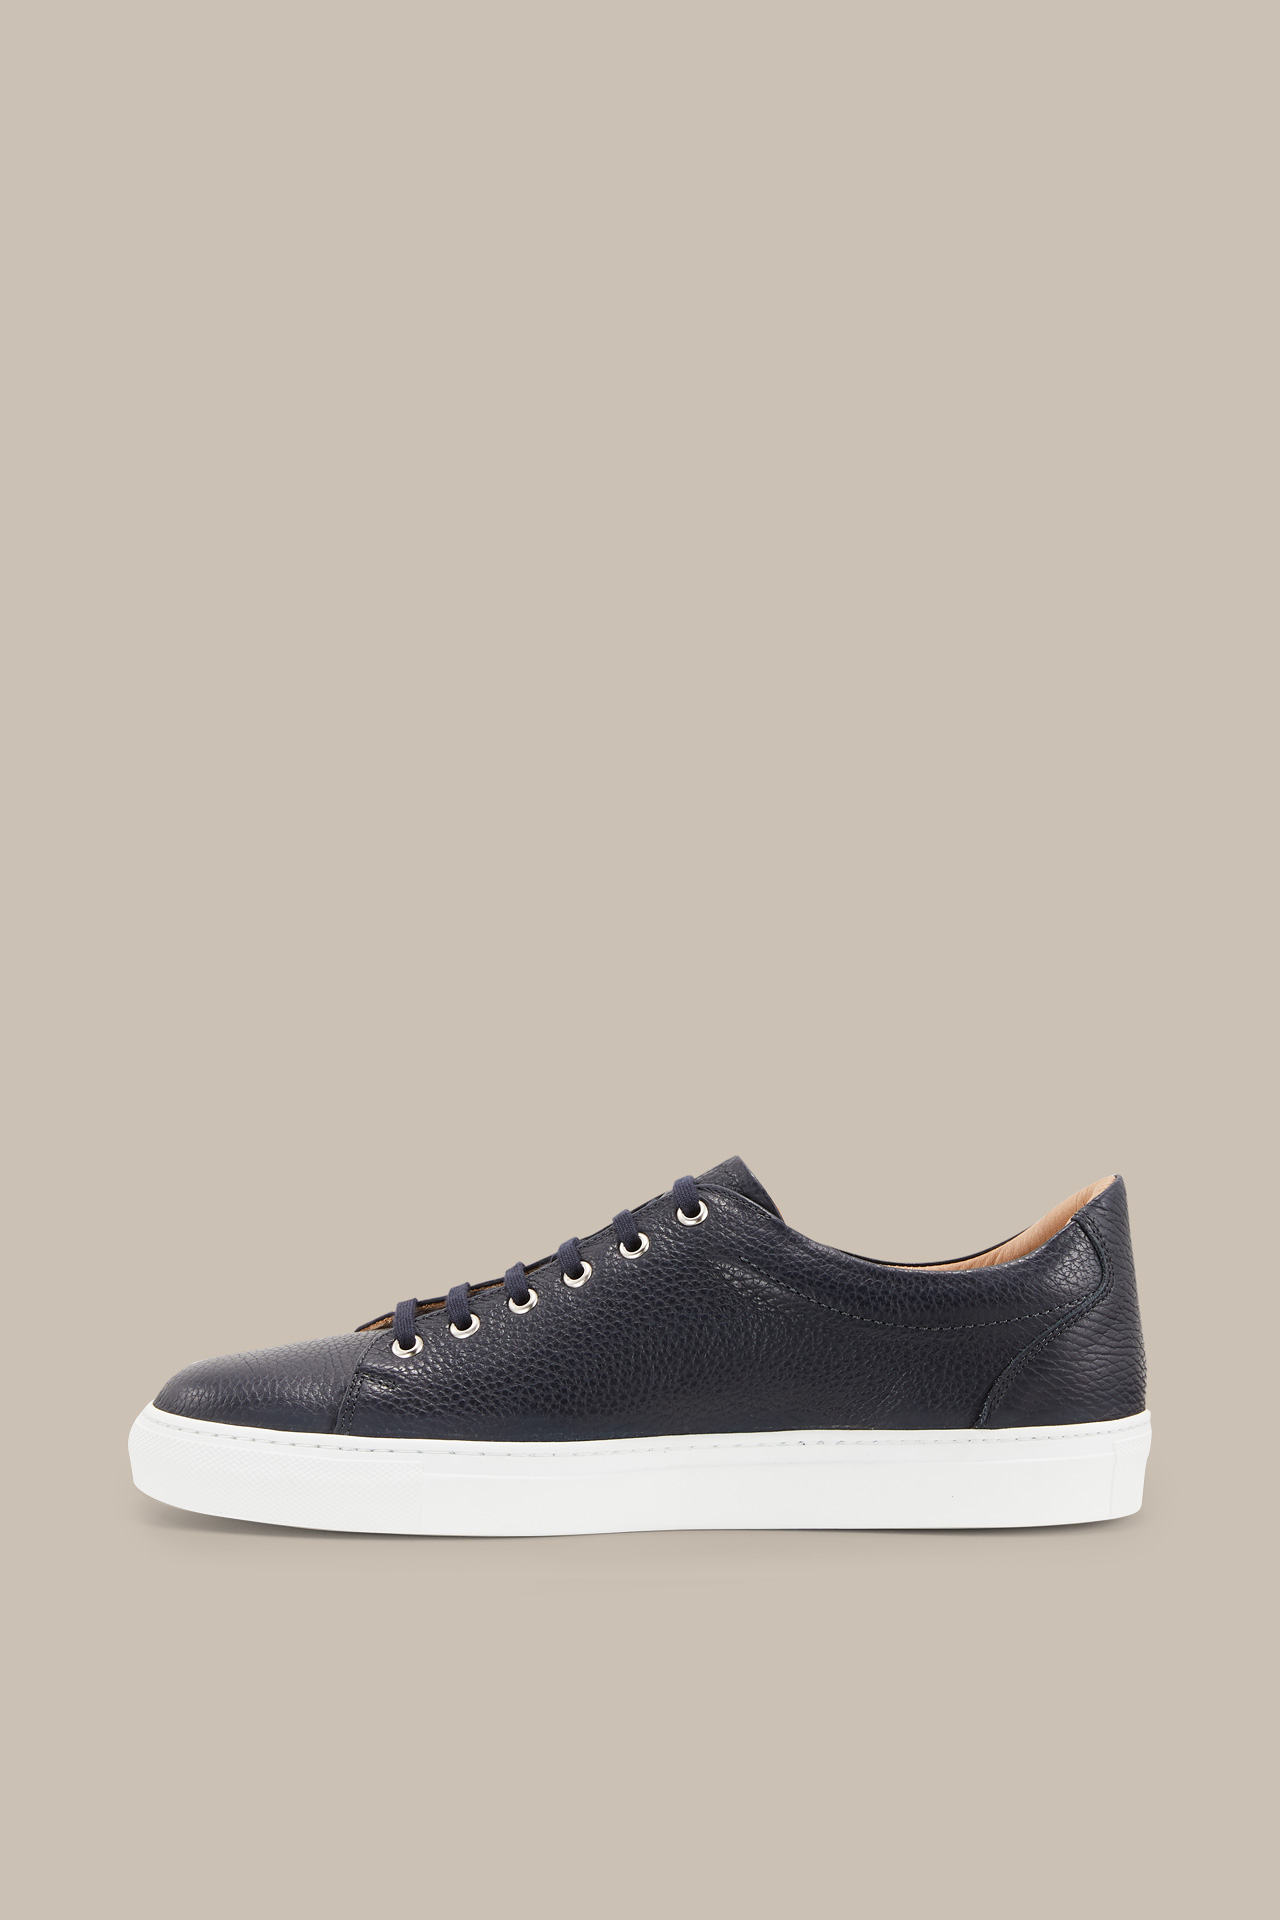 Flat Tennis Trainers by Ludwig Reiter in navy, unisex